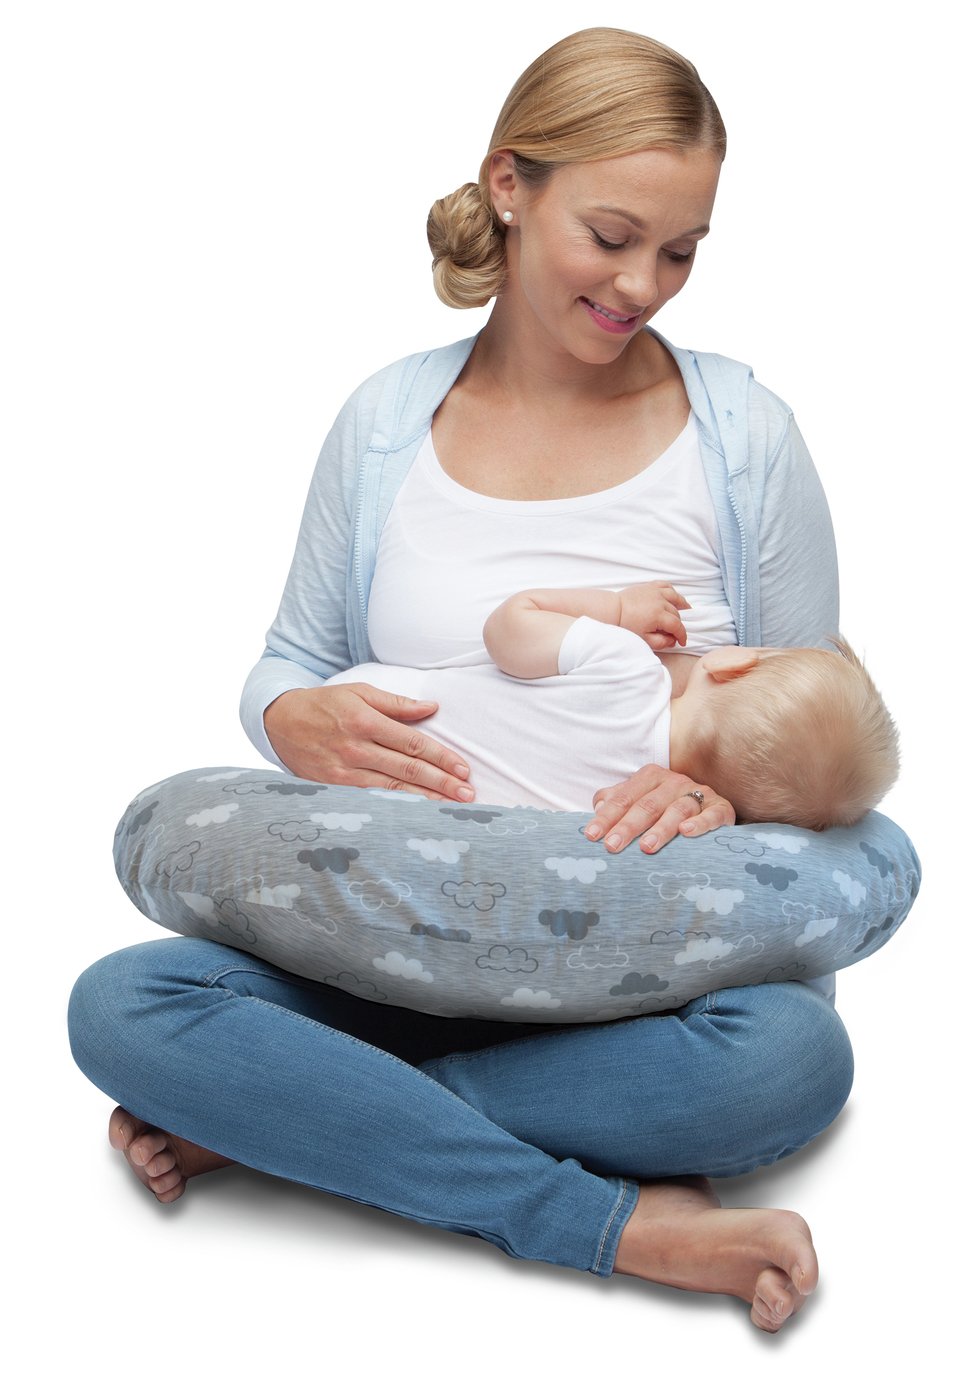 Chicco Boppy Pregnancy and Baby Nursing Pillow - Grey